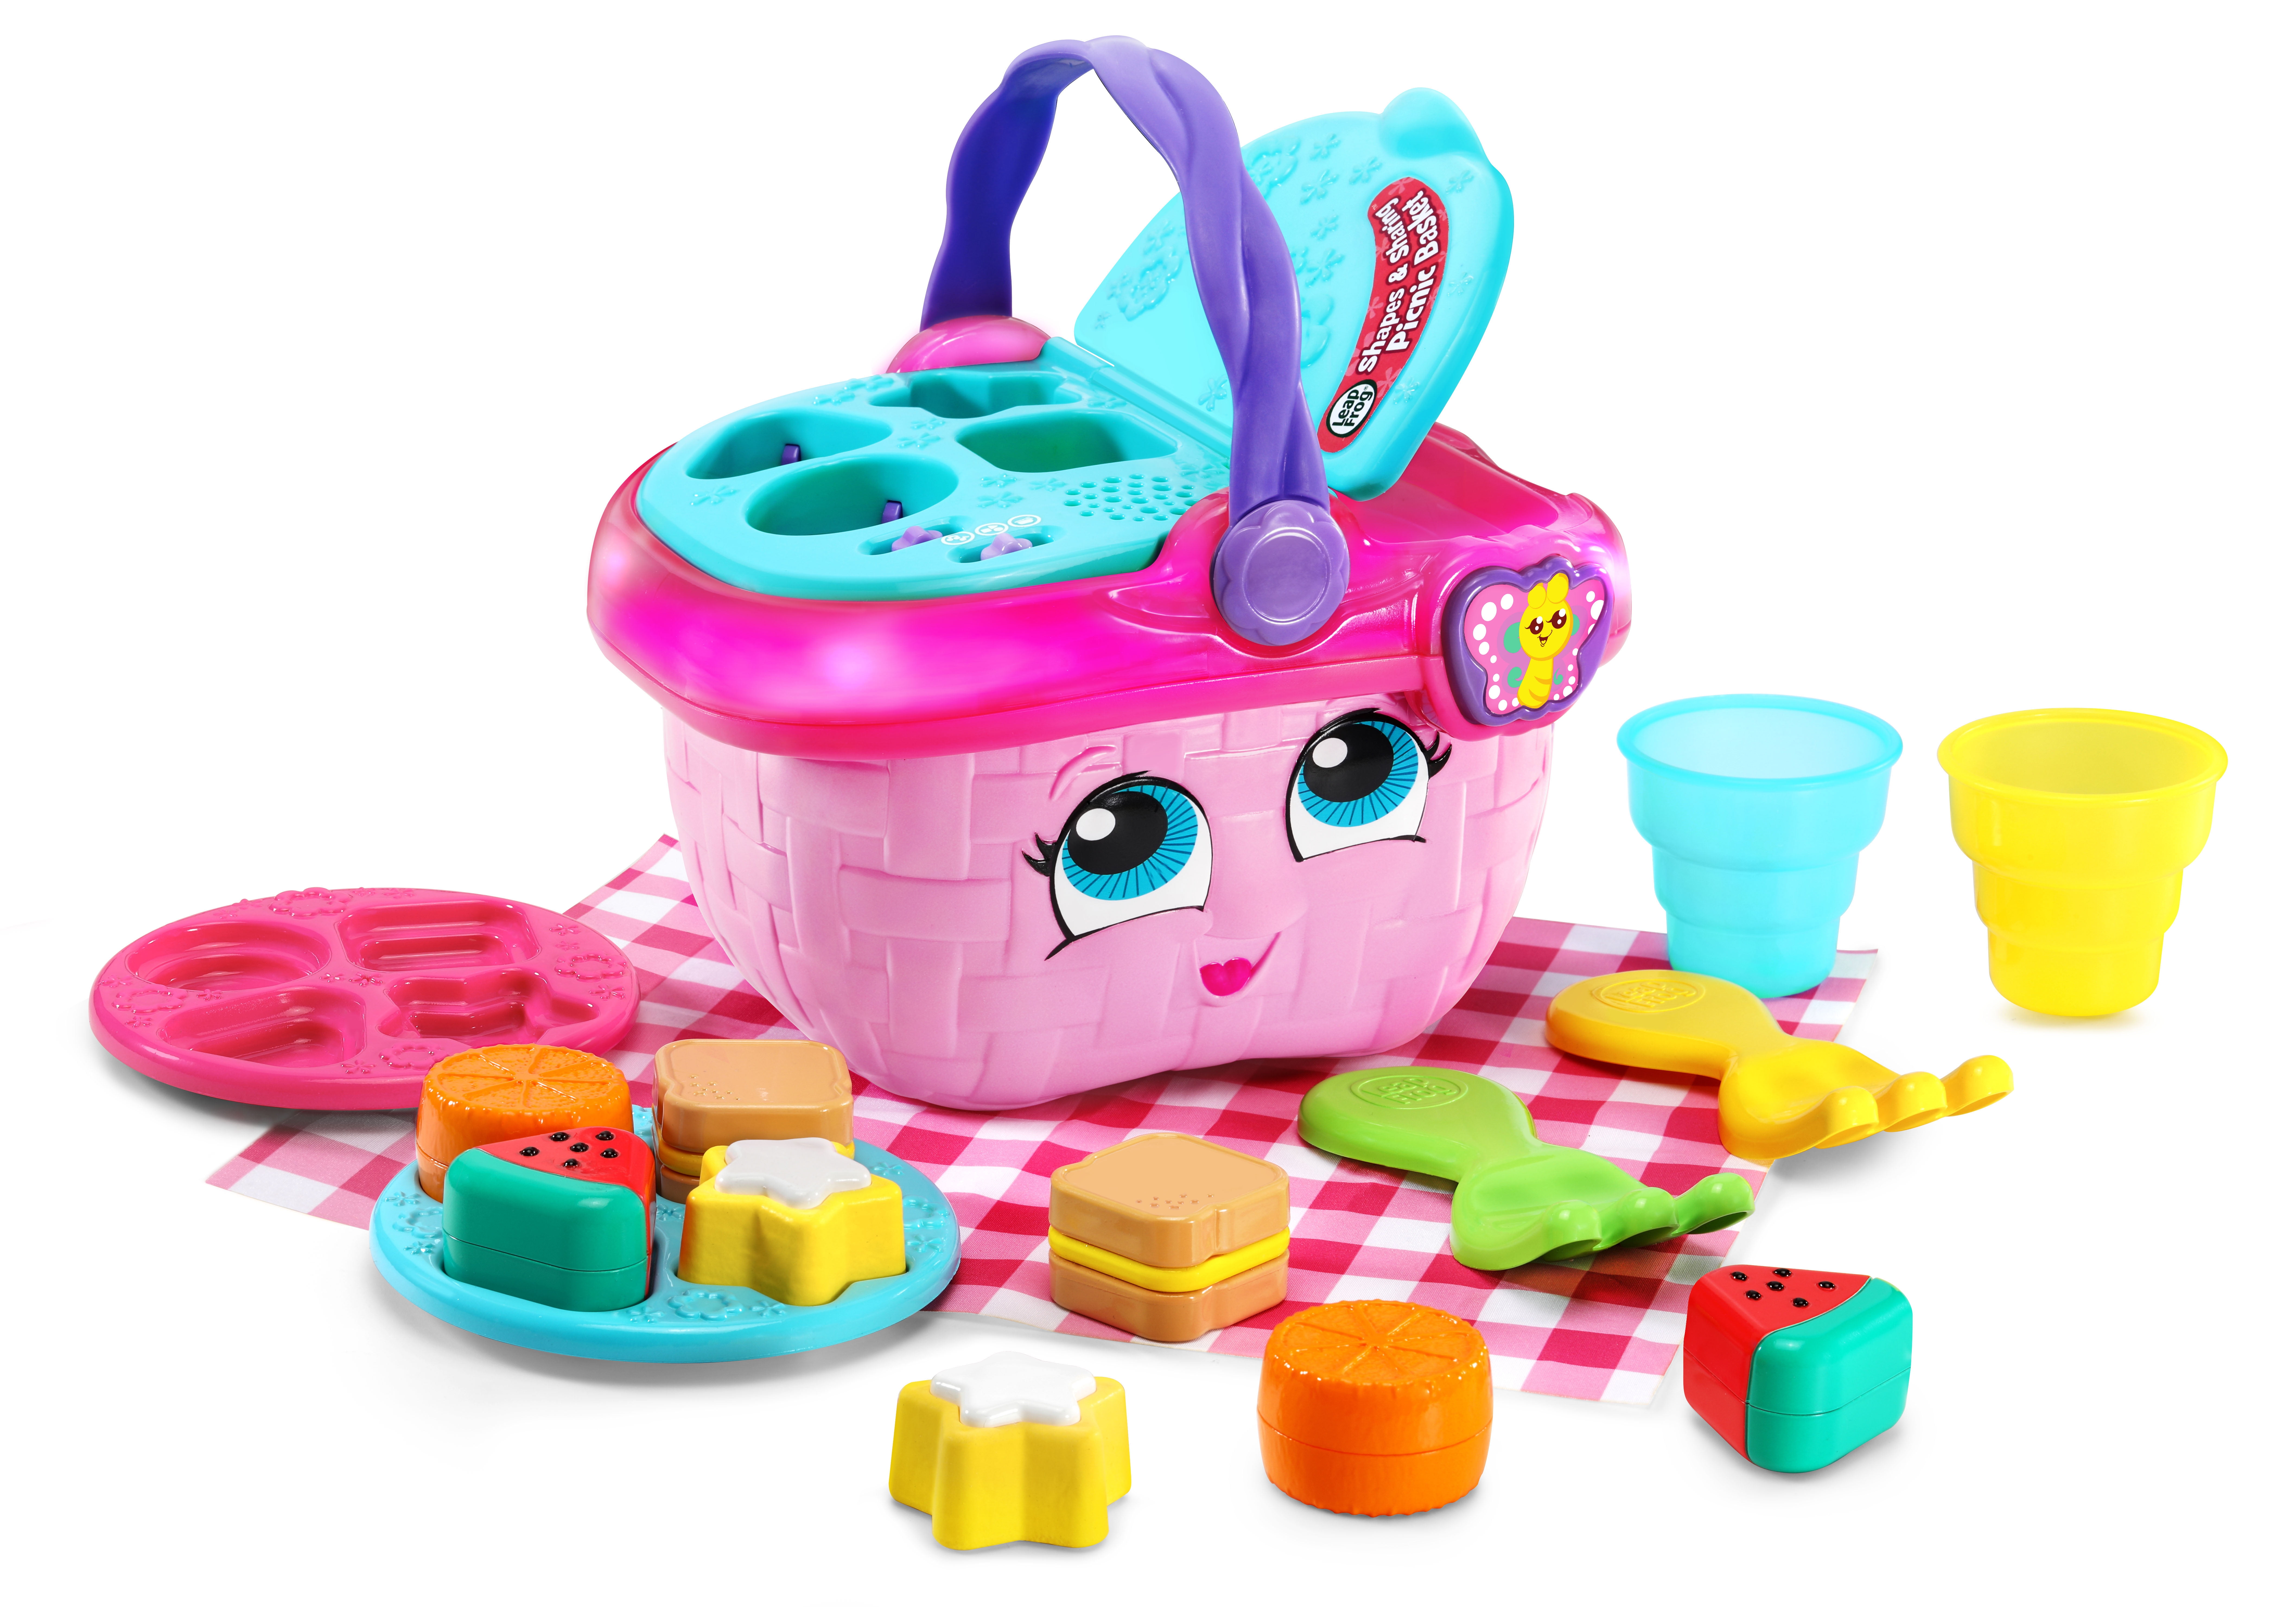 LeapFrog 603653 Shapes & Sharing Picnic Basket Yellow Shapes and Sharing Learning Toy One Size 